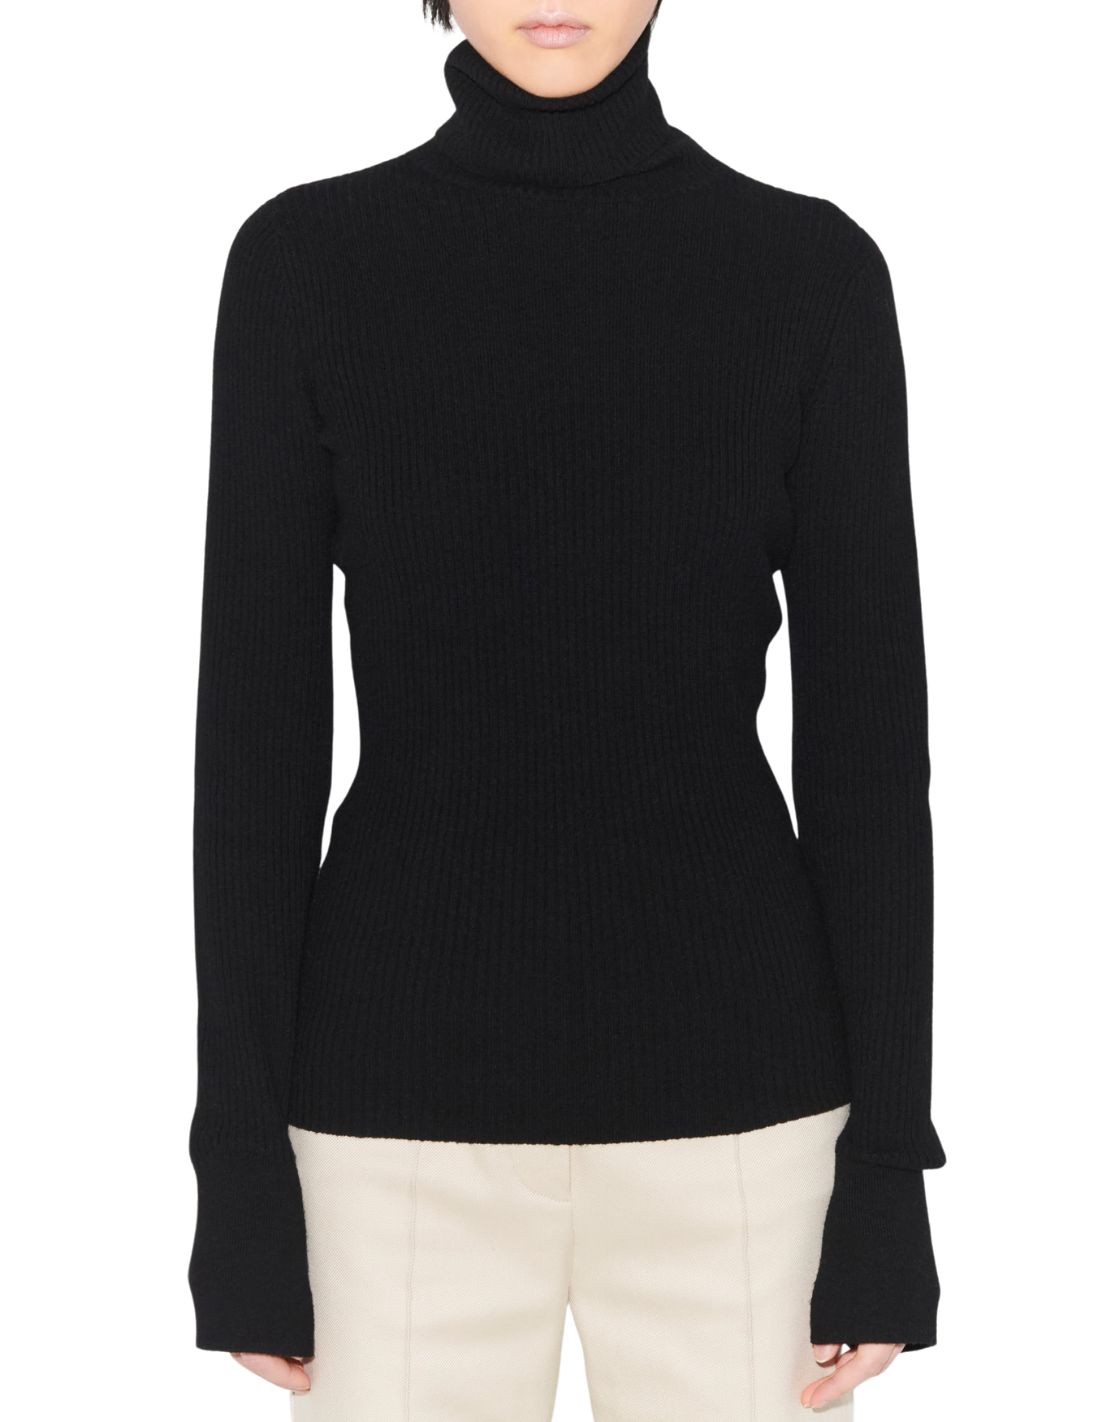 Black wool and cashmere rollneck sweater BARBARA BUI - FW22